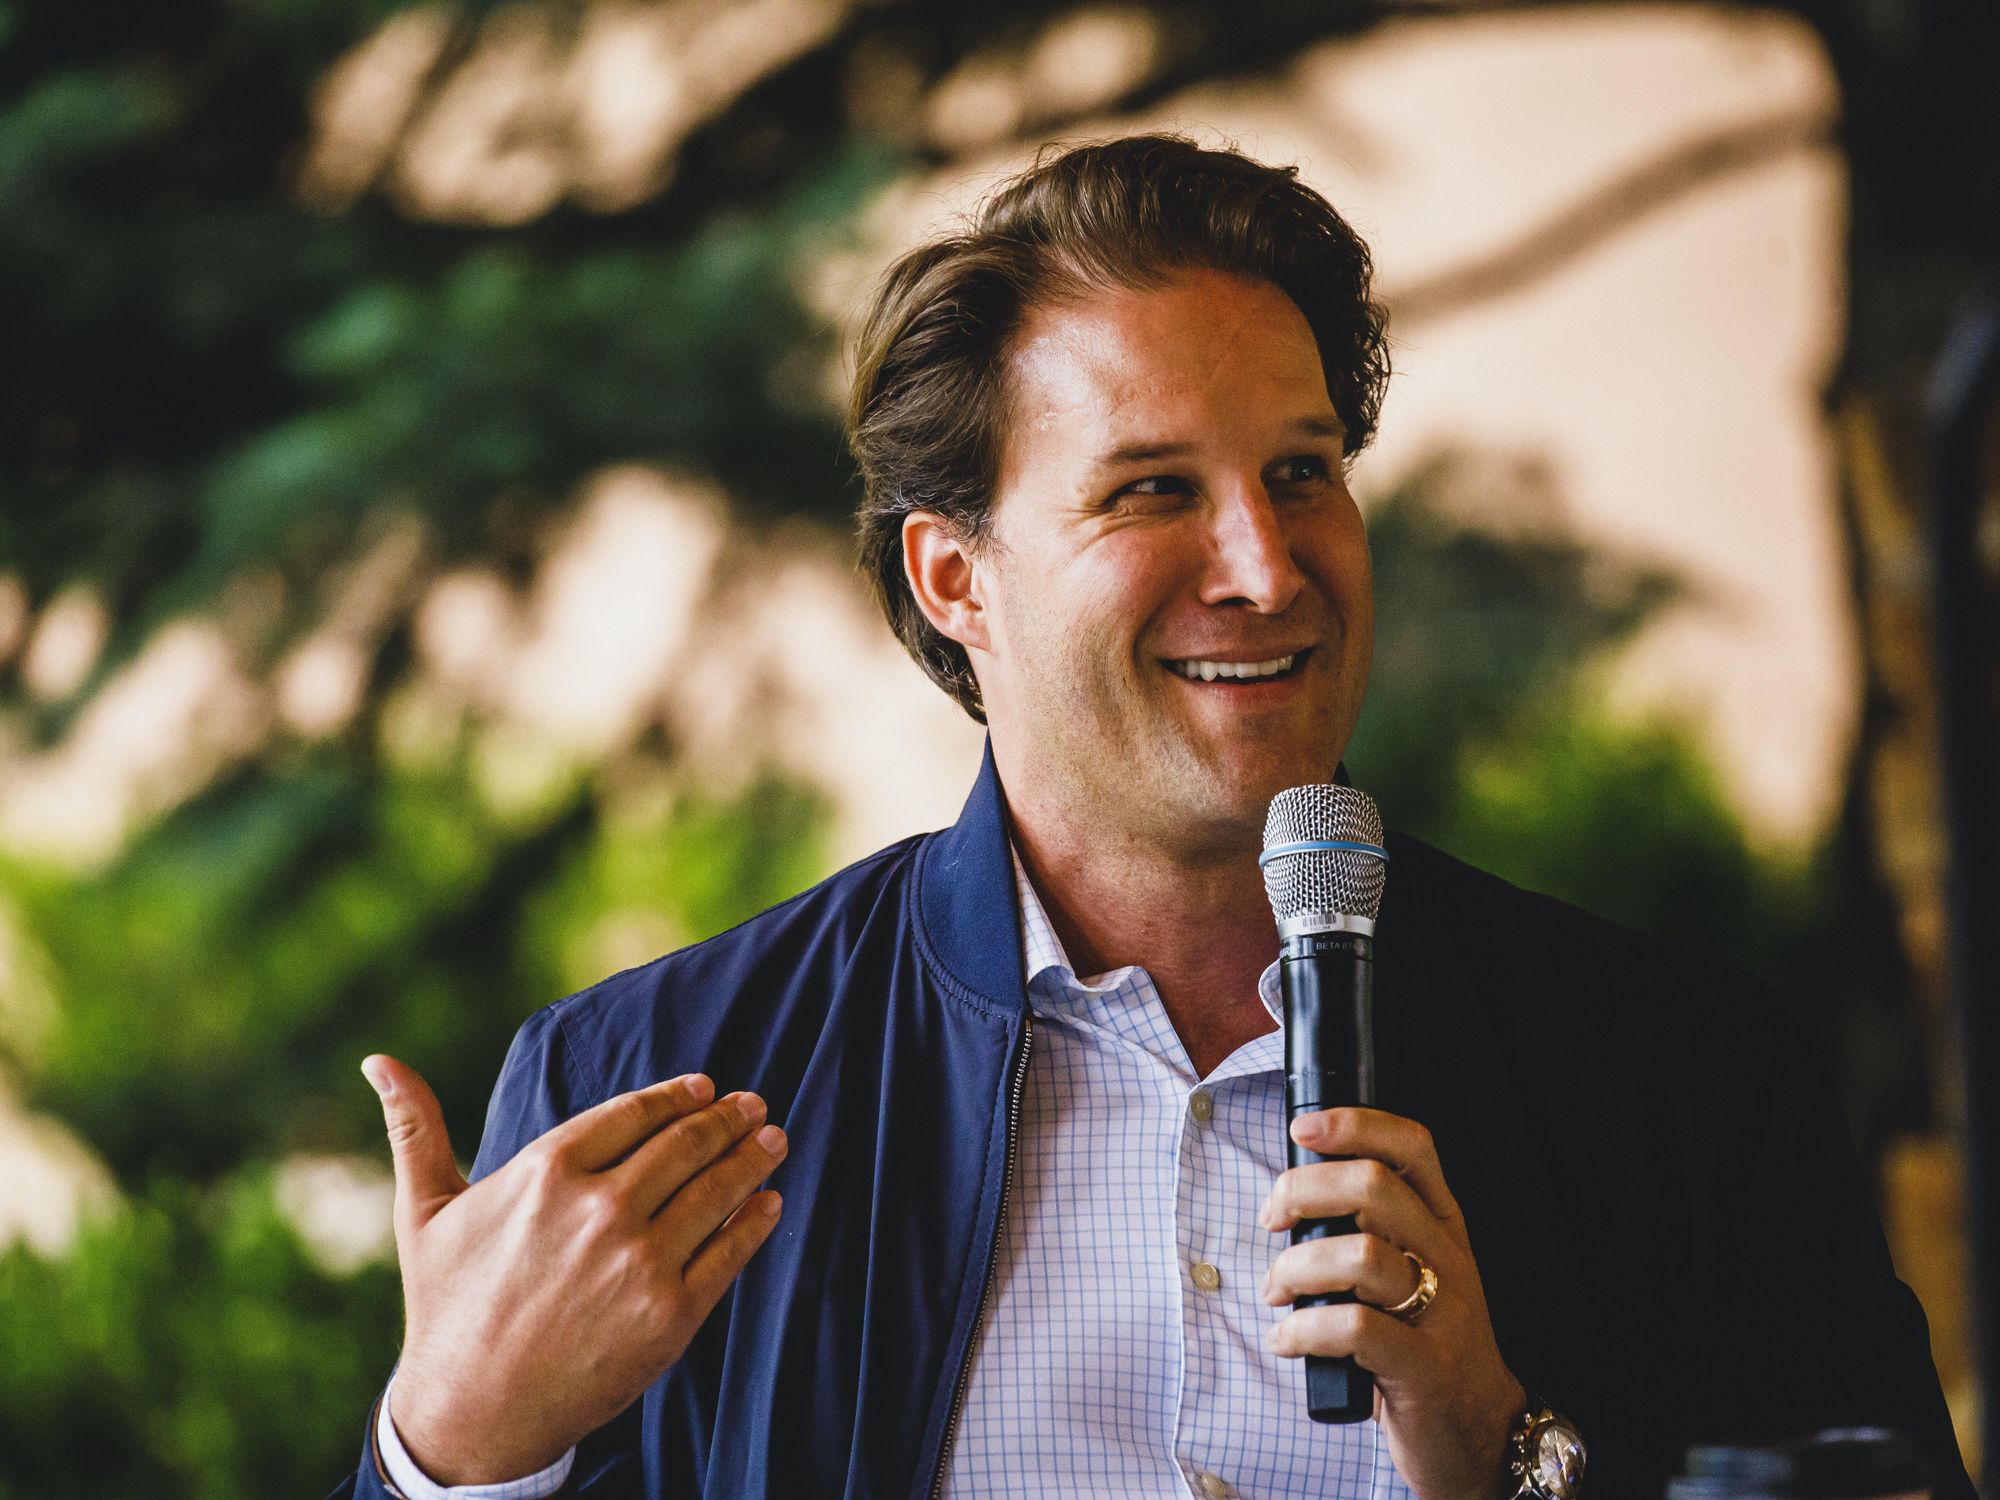 LA Venture: Taylor Adams on His ‘Blended Approach’ to VC